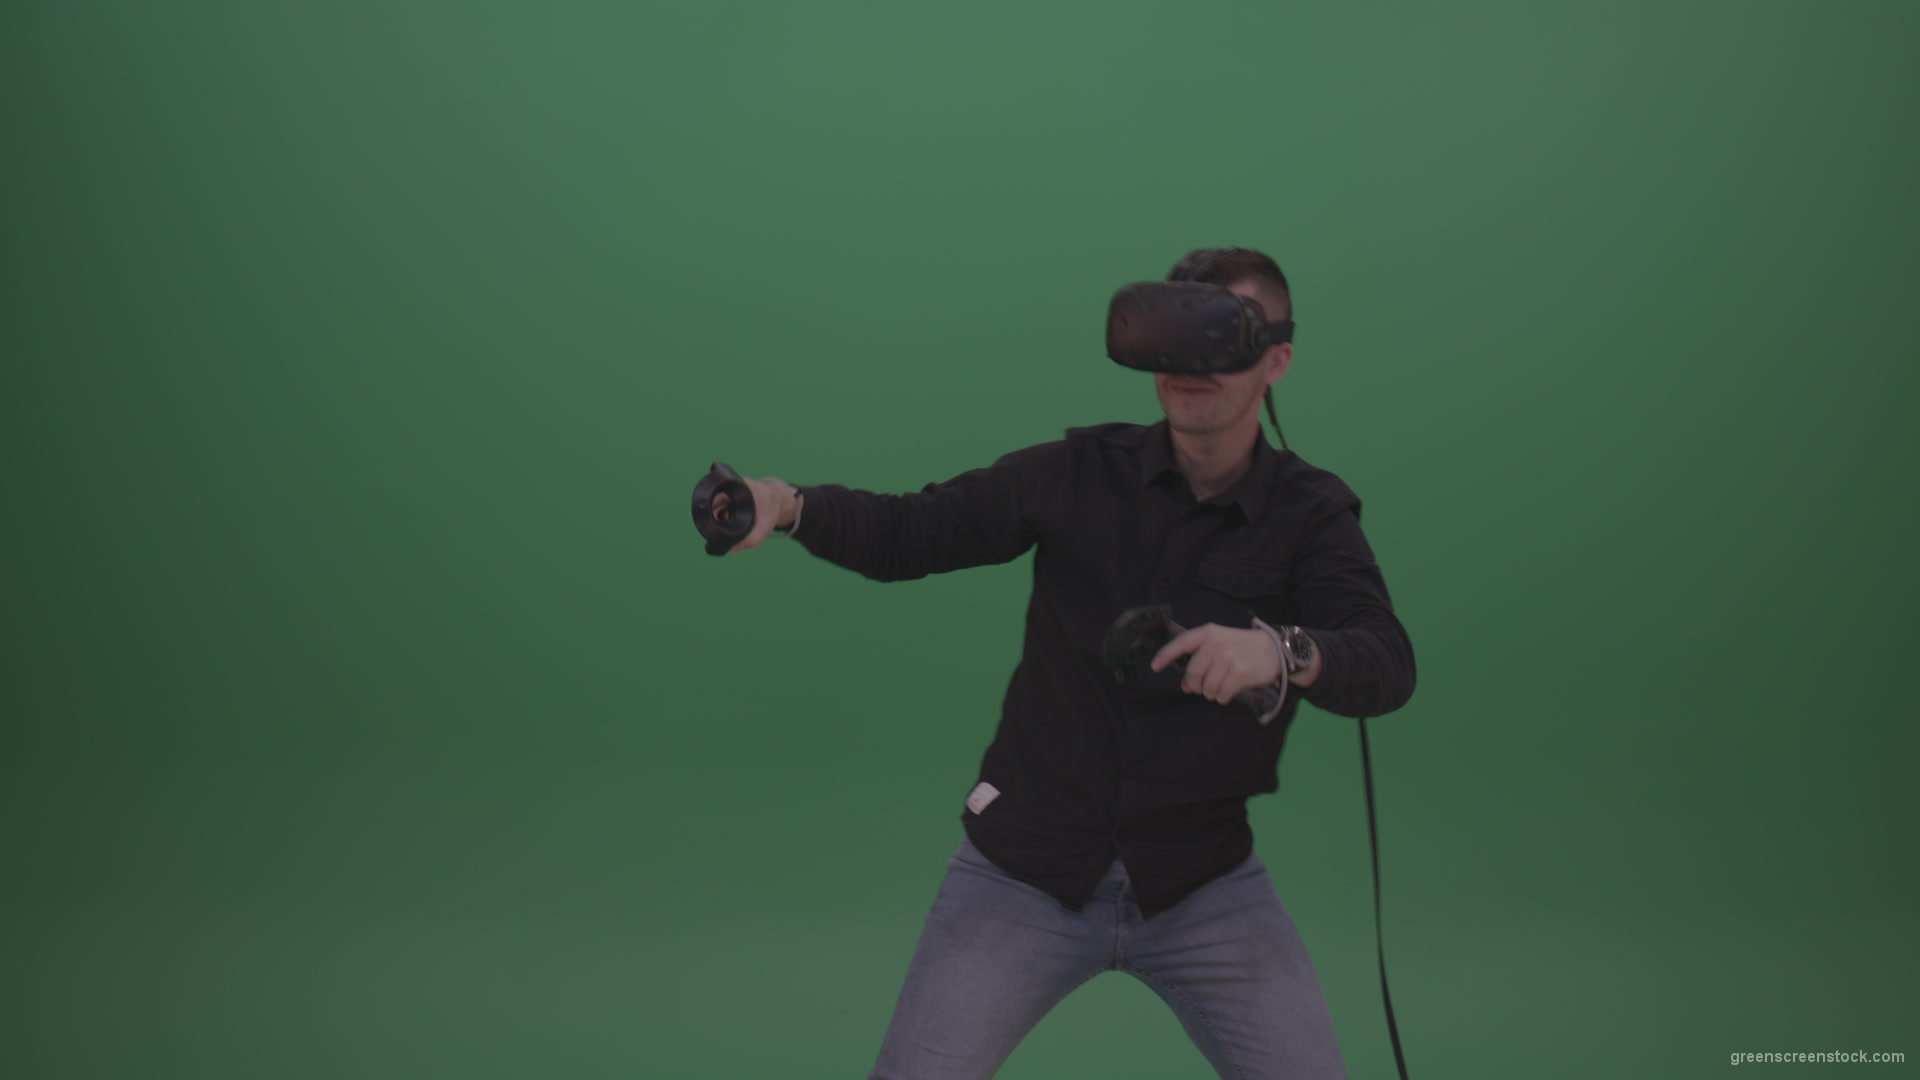 Young_Dangerous_Brunette_Man_Wearing_Black_Shirt_Shooting_Enemies_All_Around_In_Virtual_Reality_Glasses_Green_Screen_Wall_Background_009 Green Screen Stock